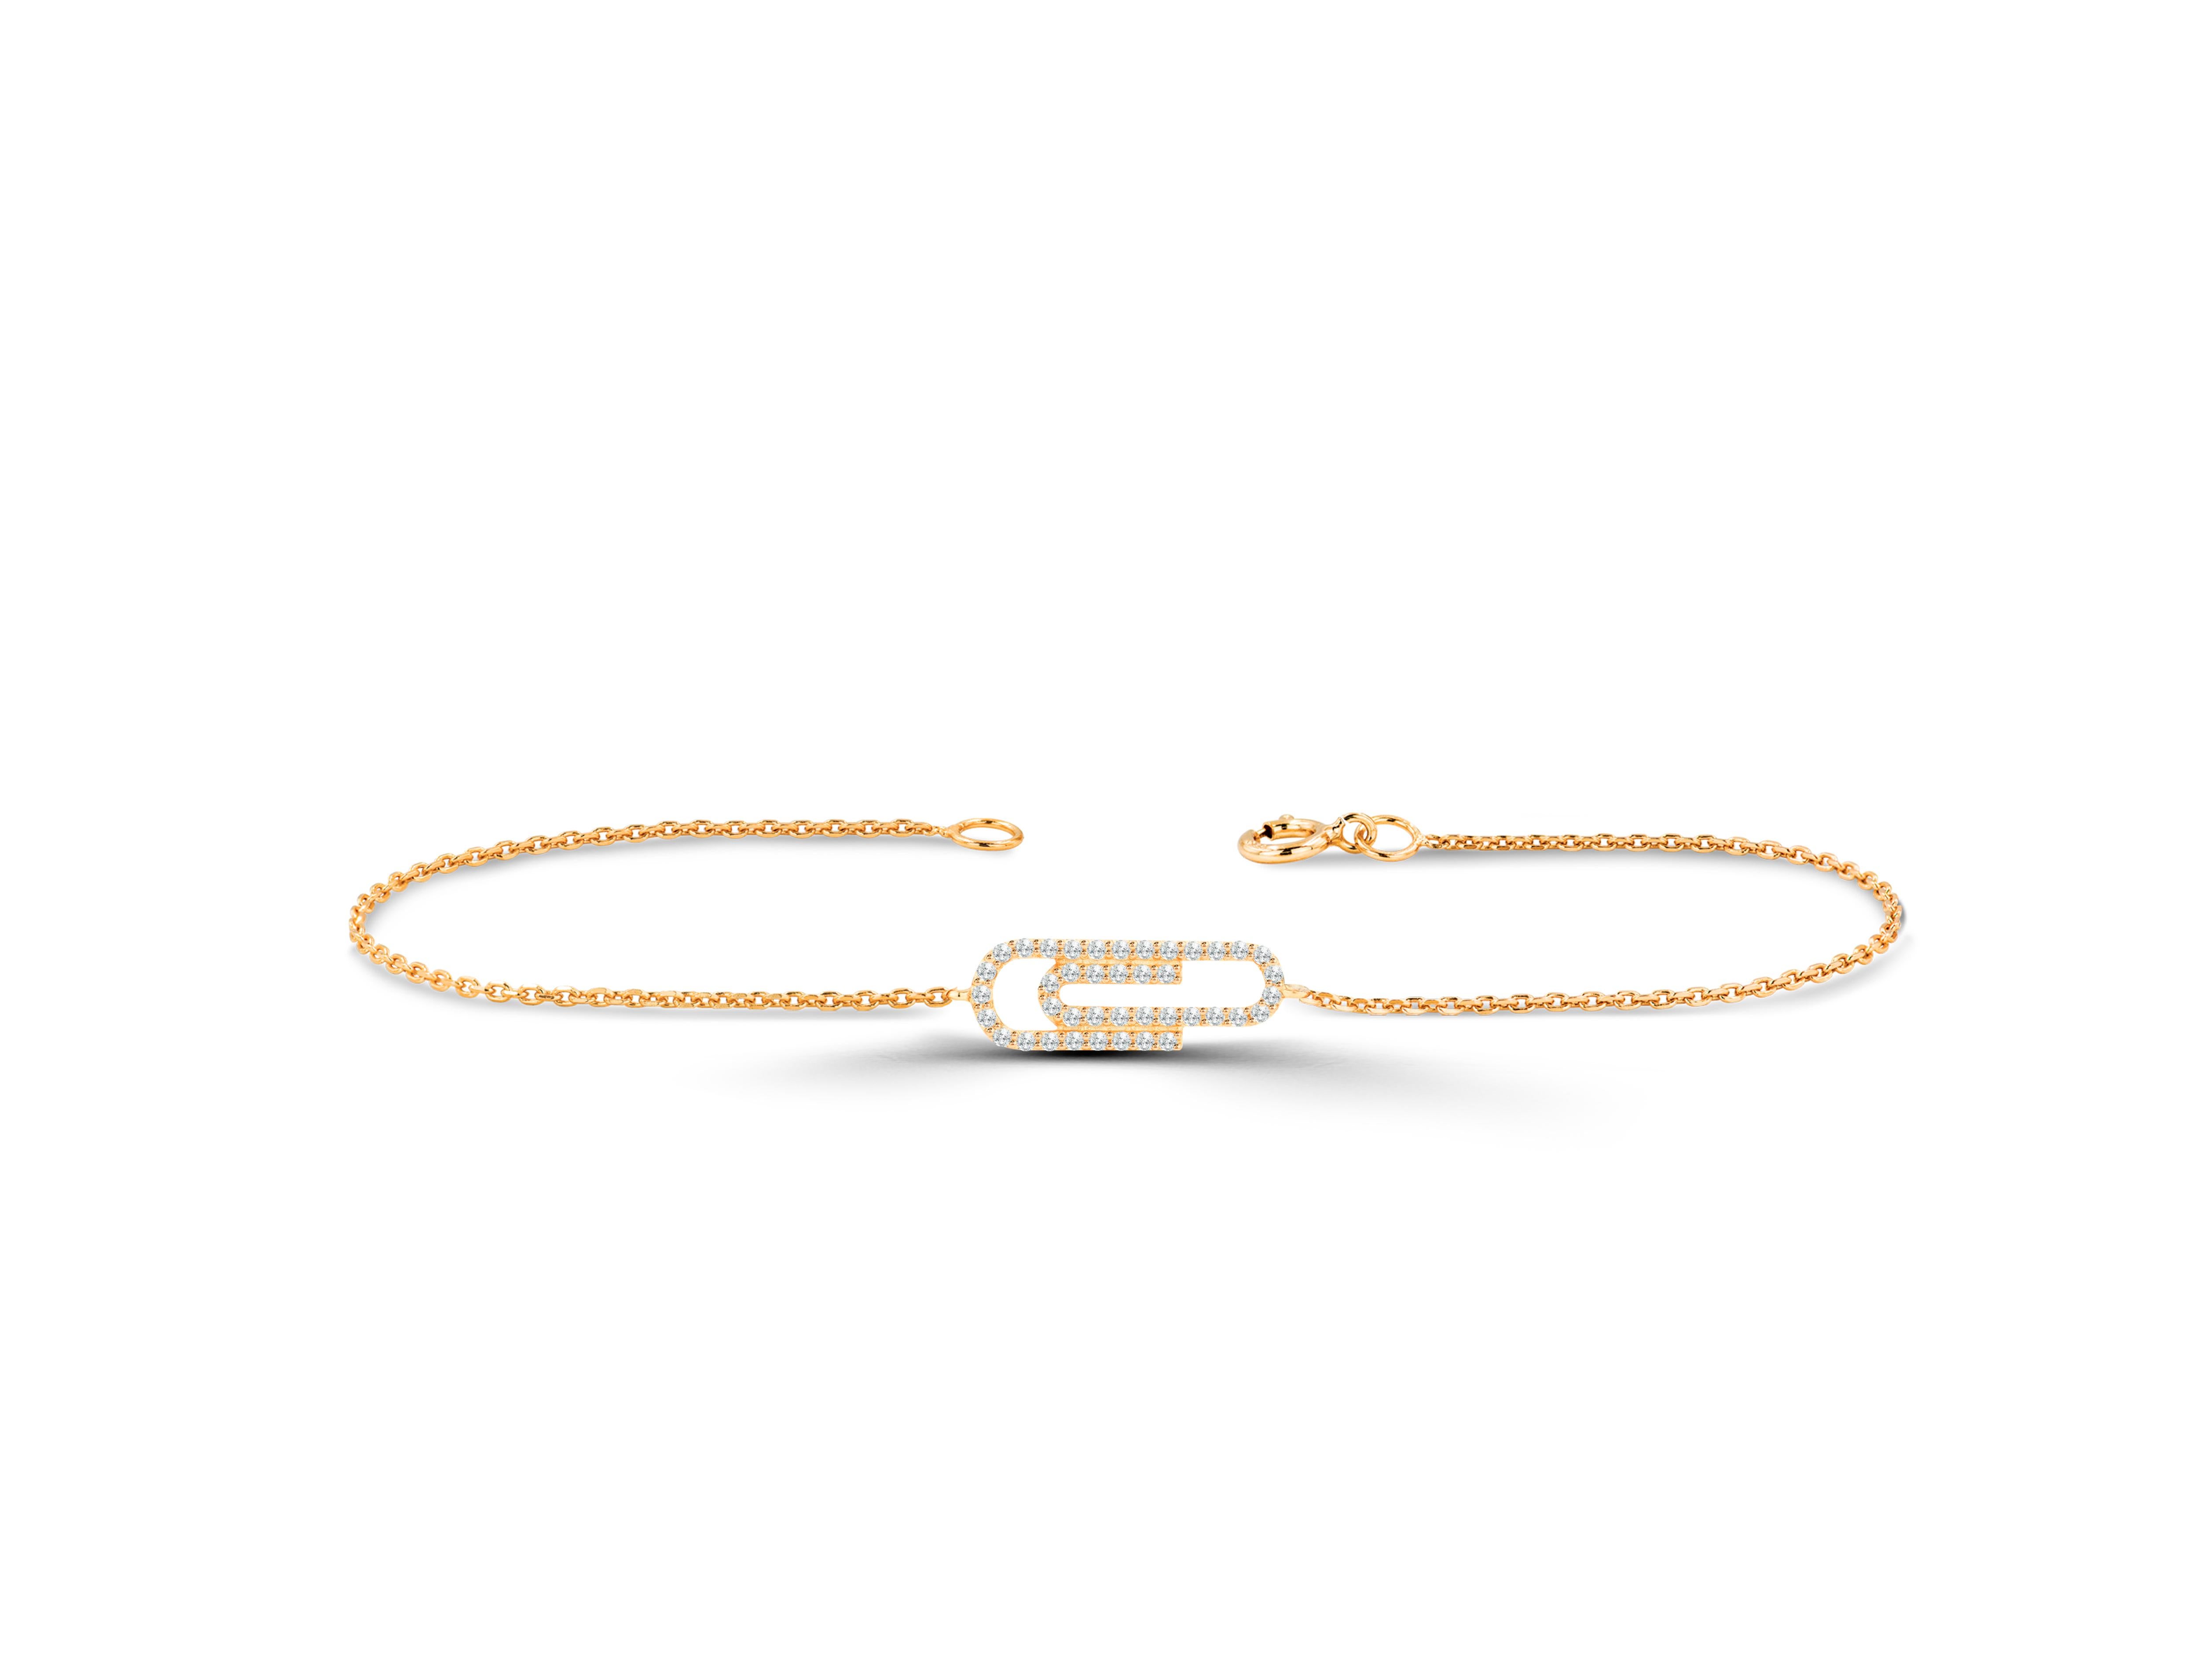 Beautiful and elegant, this Paper Clip bracelet is made with pure gold and consists of genuine and natural diamonds. This bracelet gives a sophisticated yet classy look to your hand, the bracelet can be personalized in any gold color you want. The